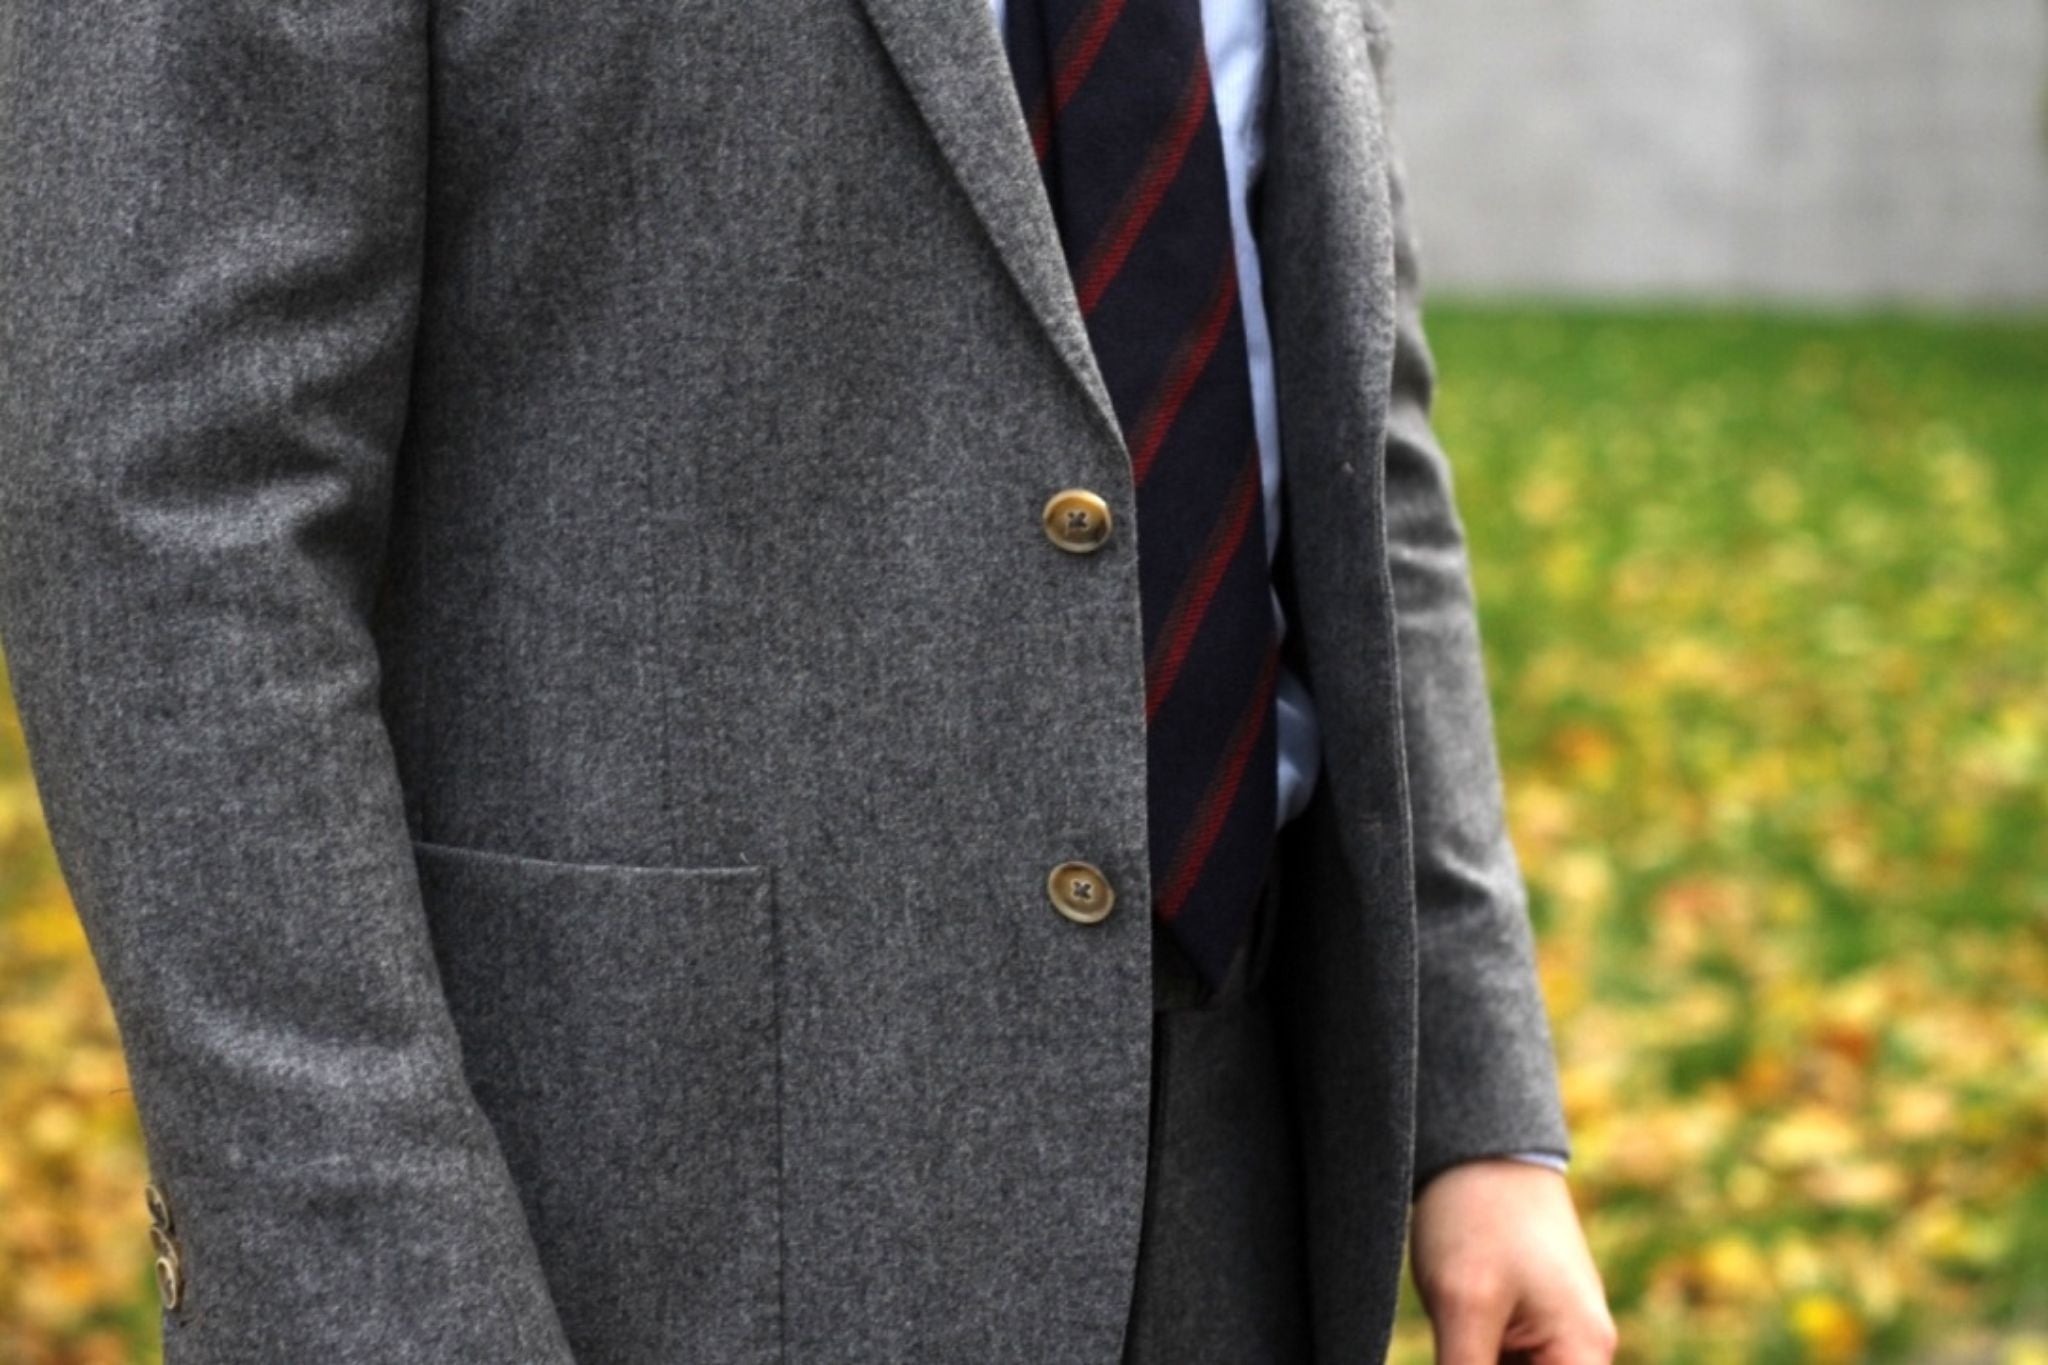 Suit with cashmere tie - Textures of gray flannel and striped cashmere